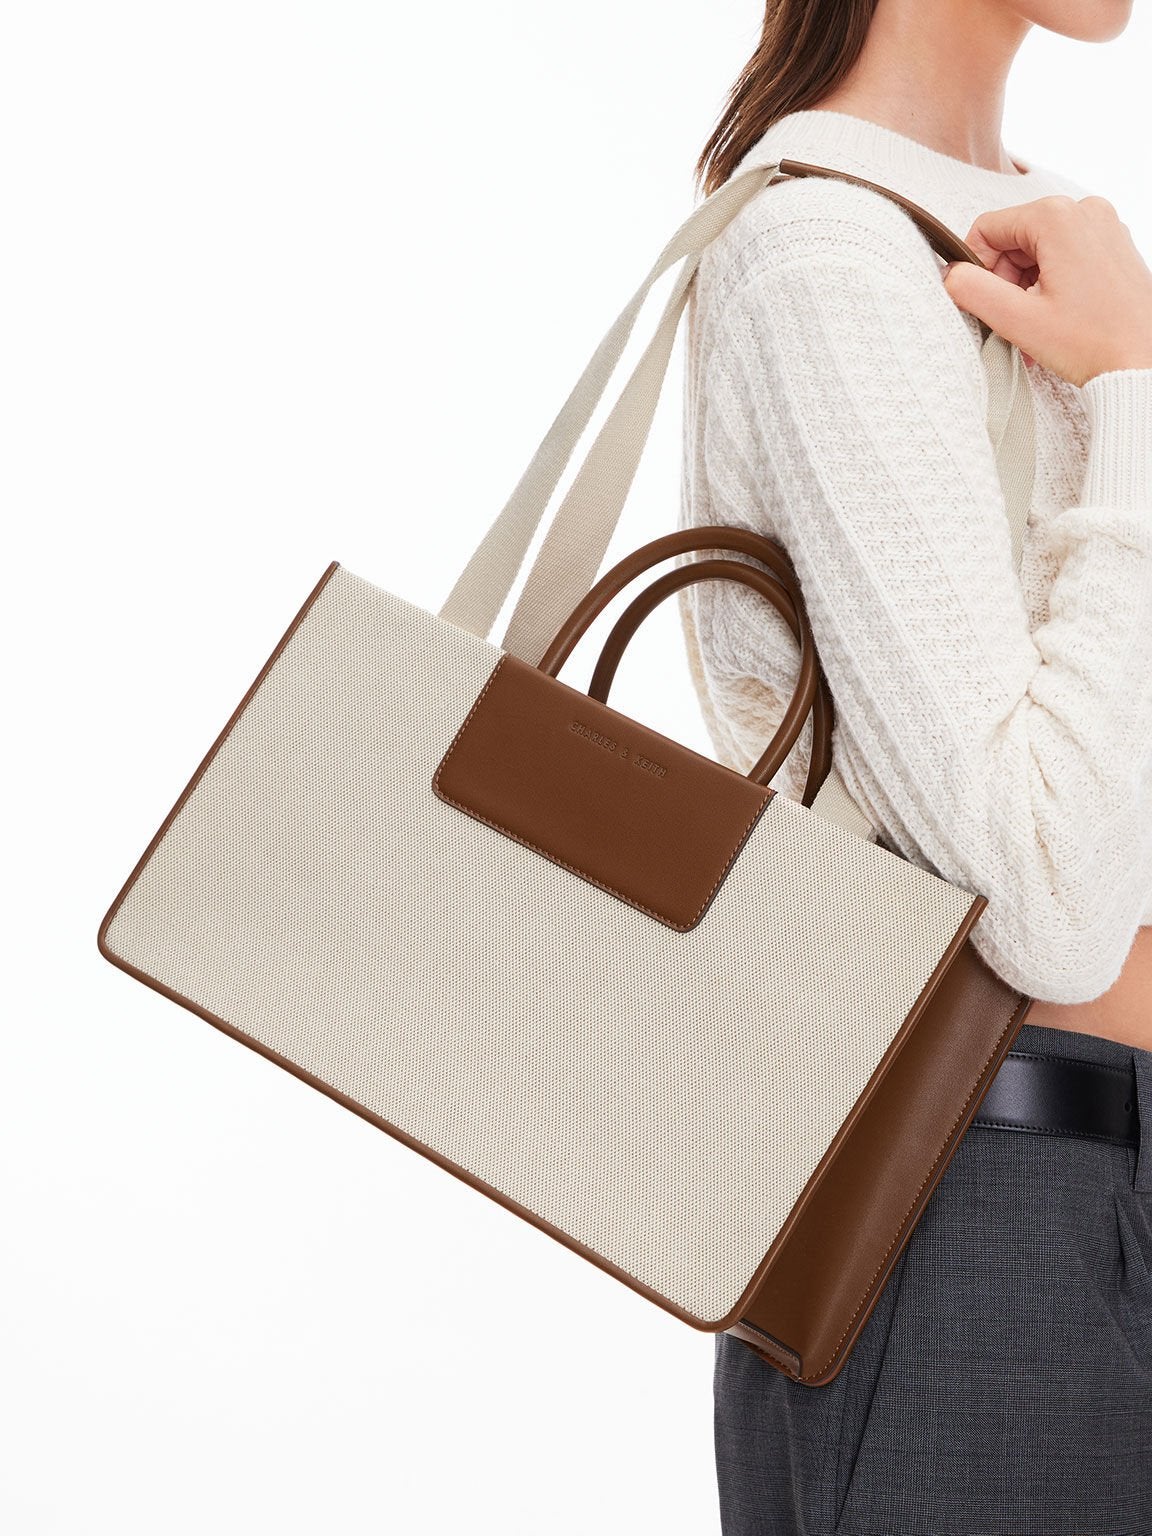 Charles & Keith + Astra Canvas Tote Bag – Chocolate